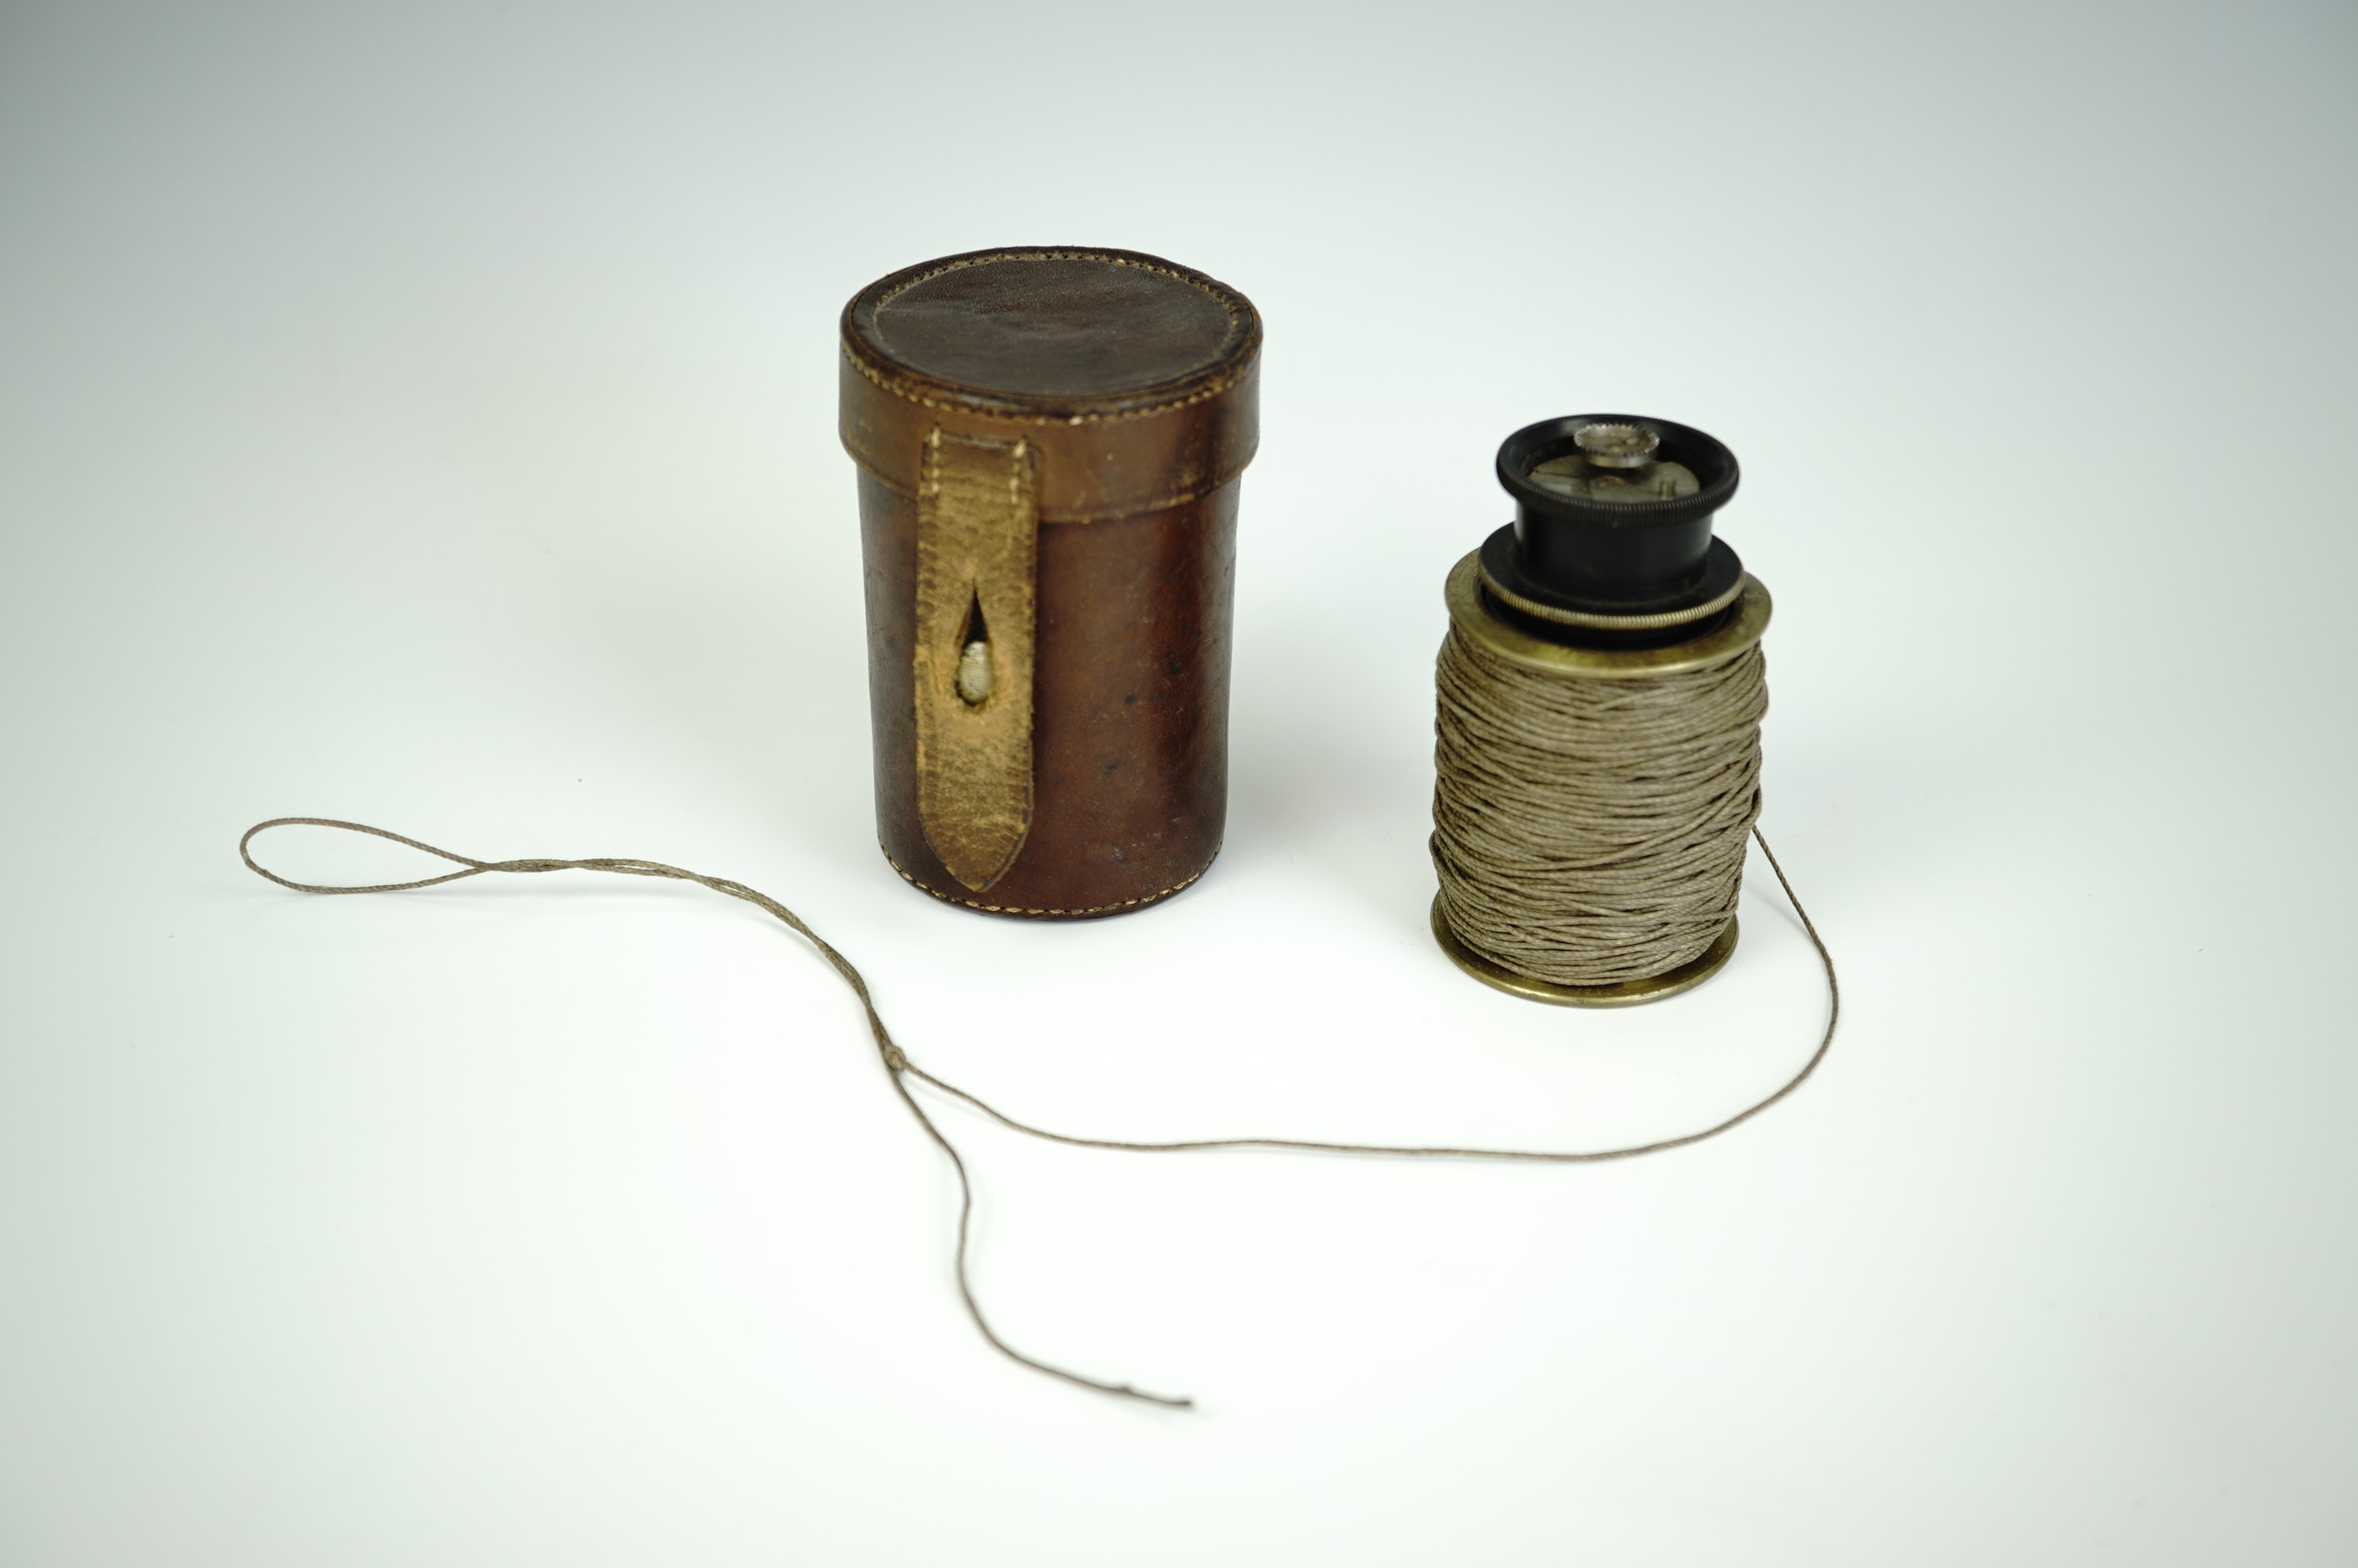 A late 19th / early 20th Century Labbez Telemeter pocket rangefinder, case 8.5 cm long